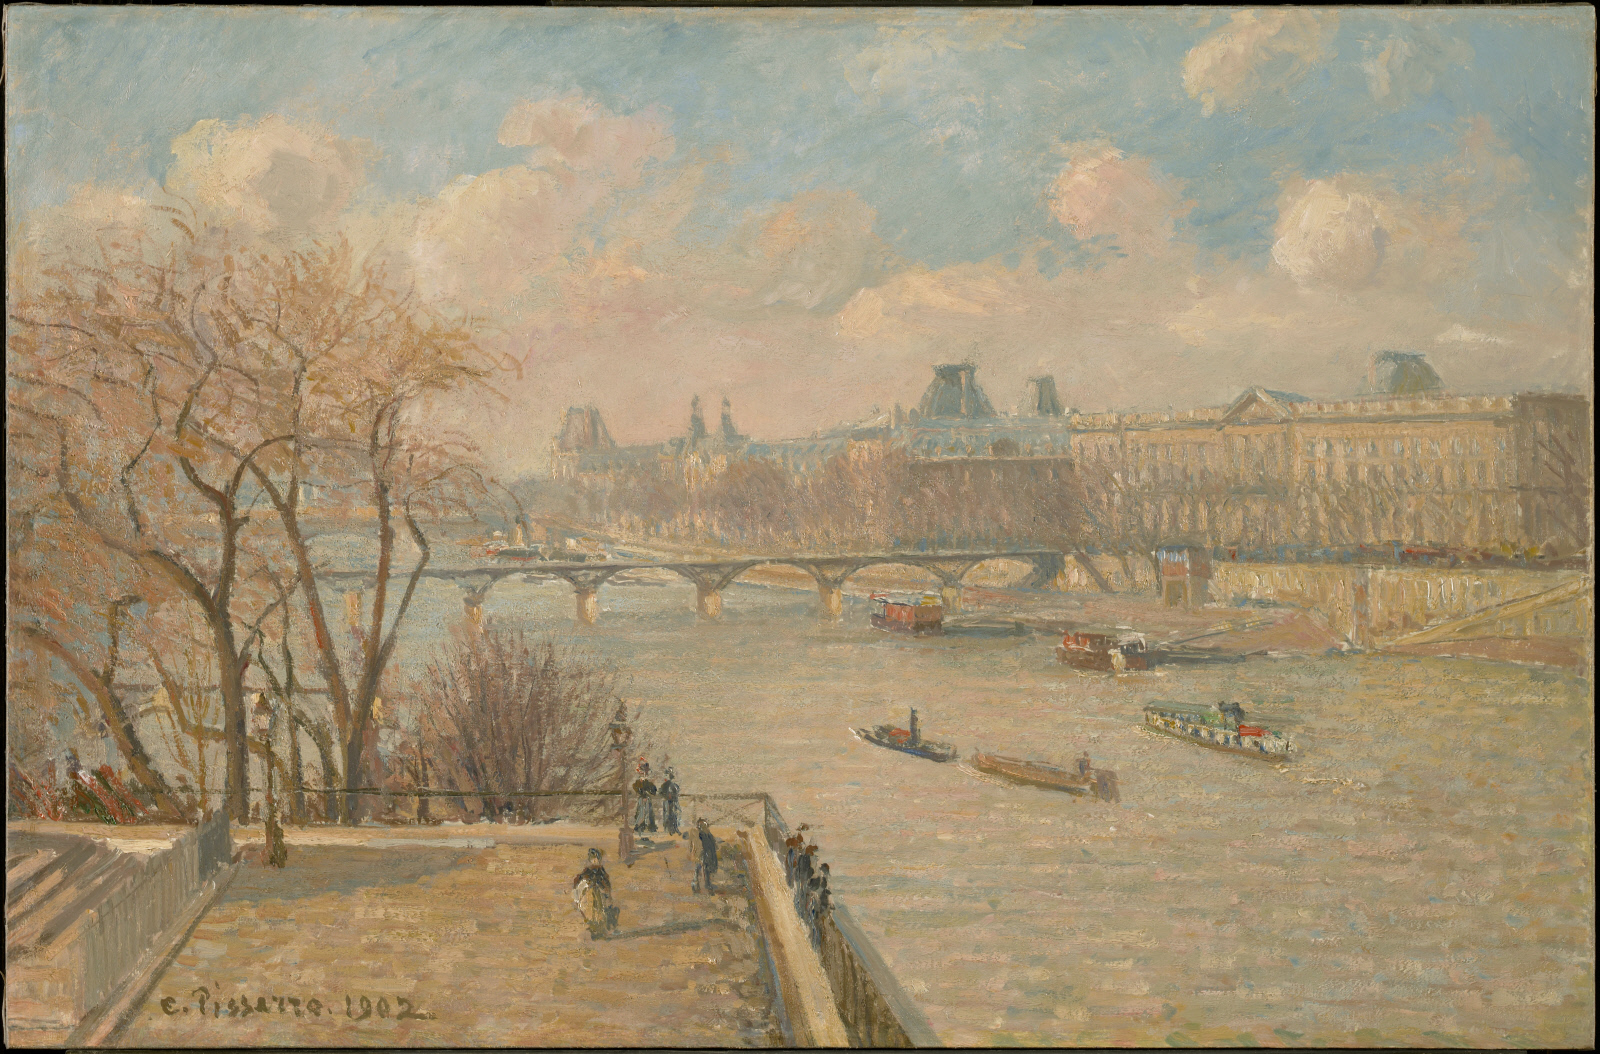 Camille Pissarro Le Pont-Neuf Painting Reproduction